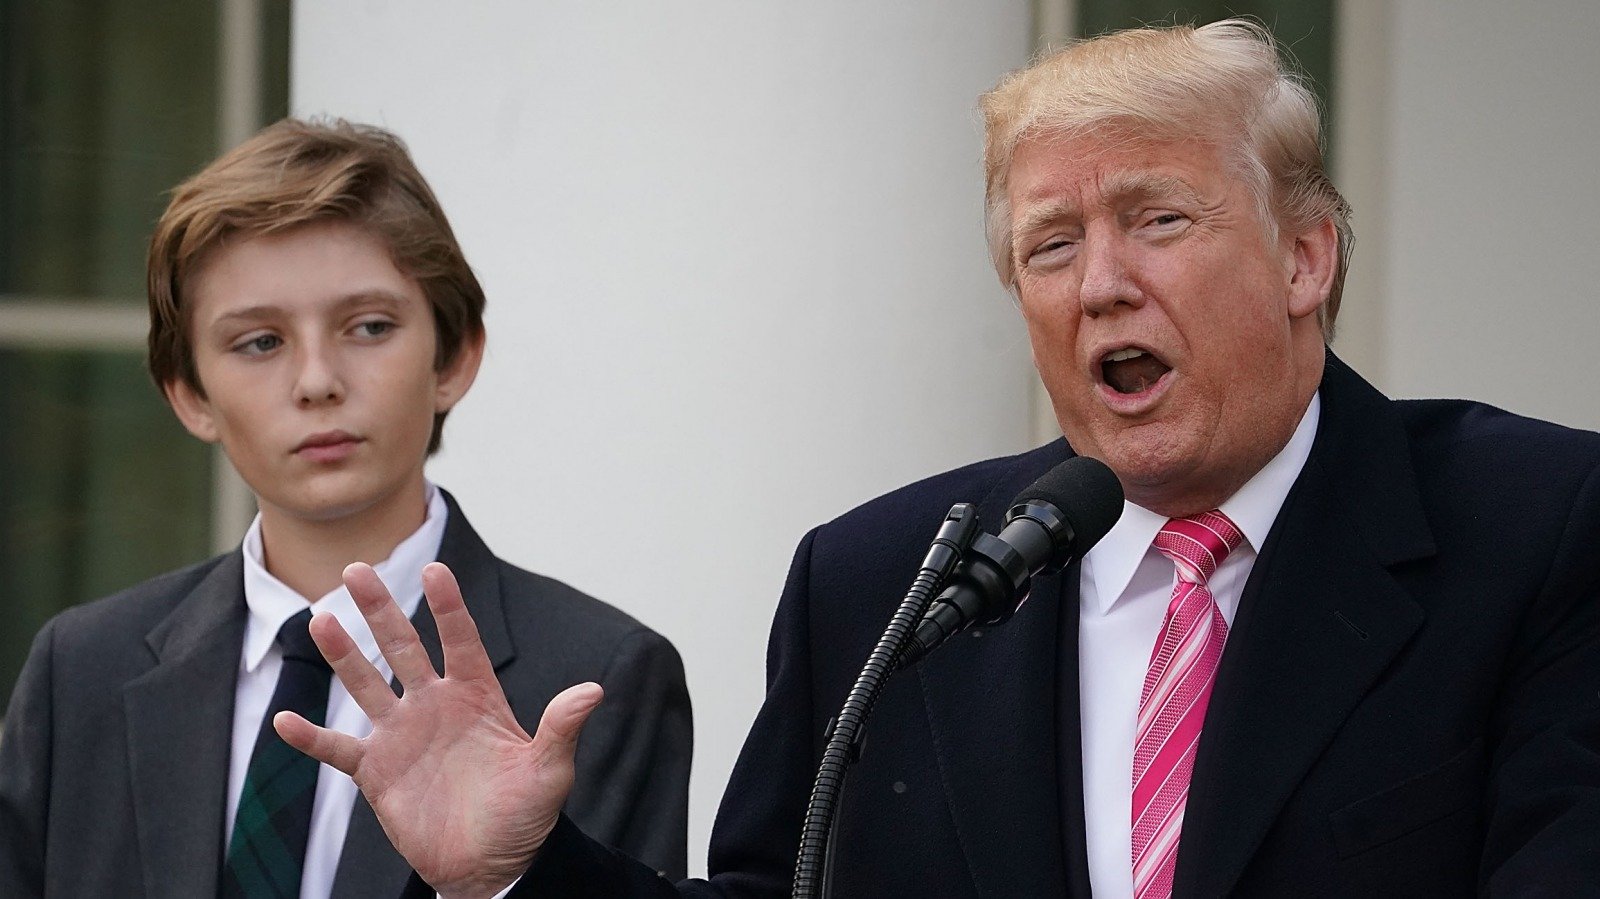 The Truth About Donald Trump's Relationship With His Son Barron - The List